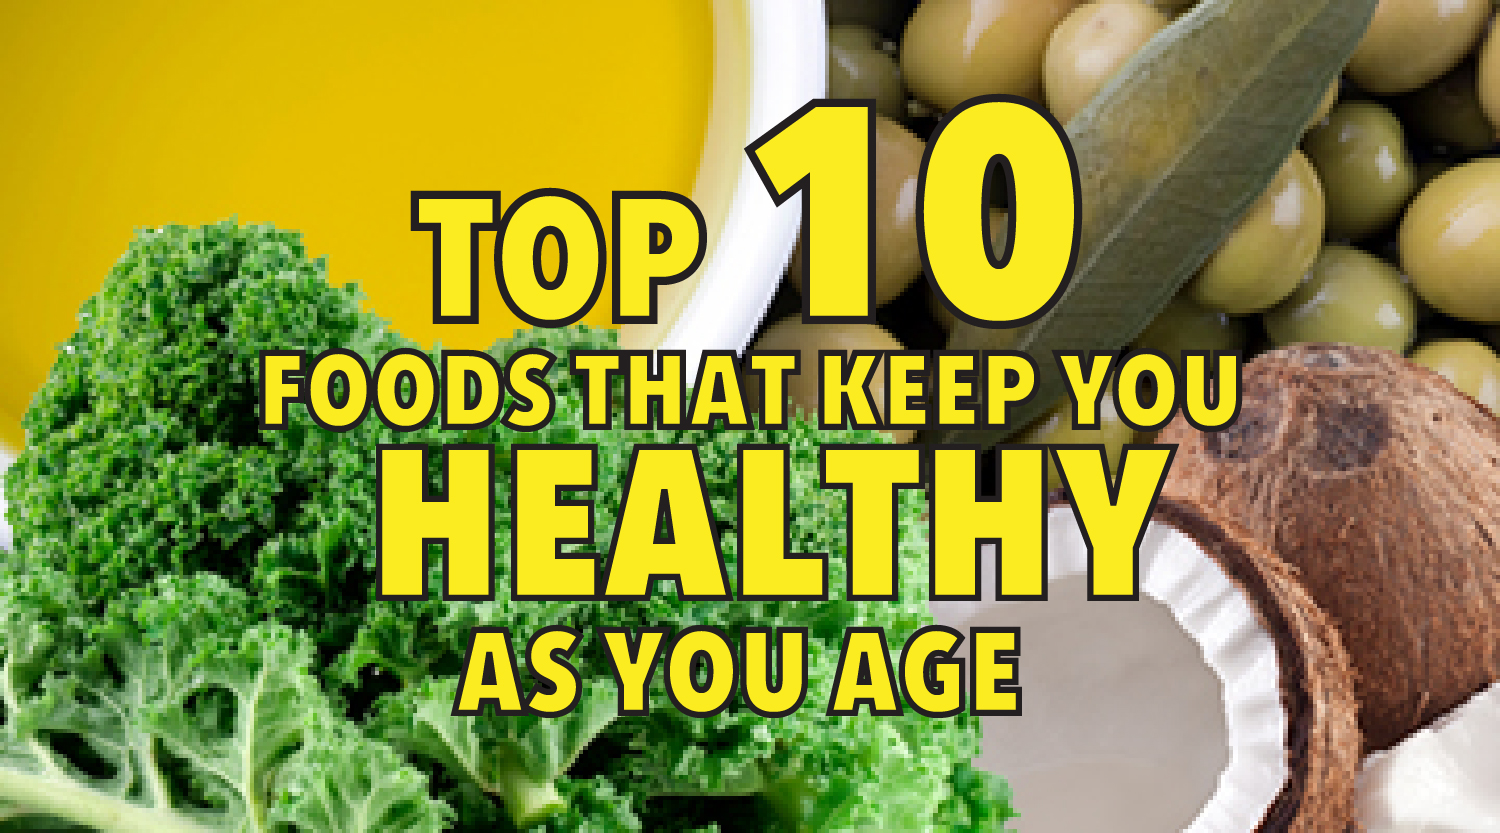 Top 10 Foods that Keep You Healthy As You Age